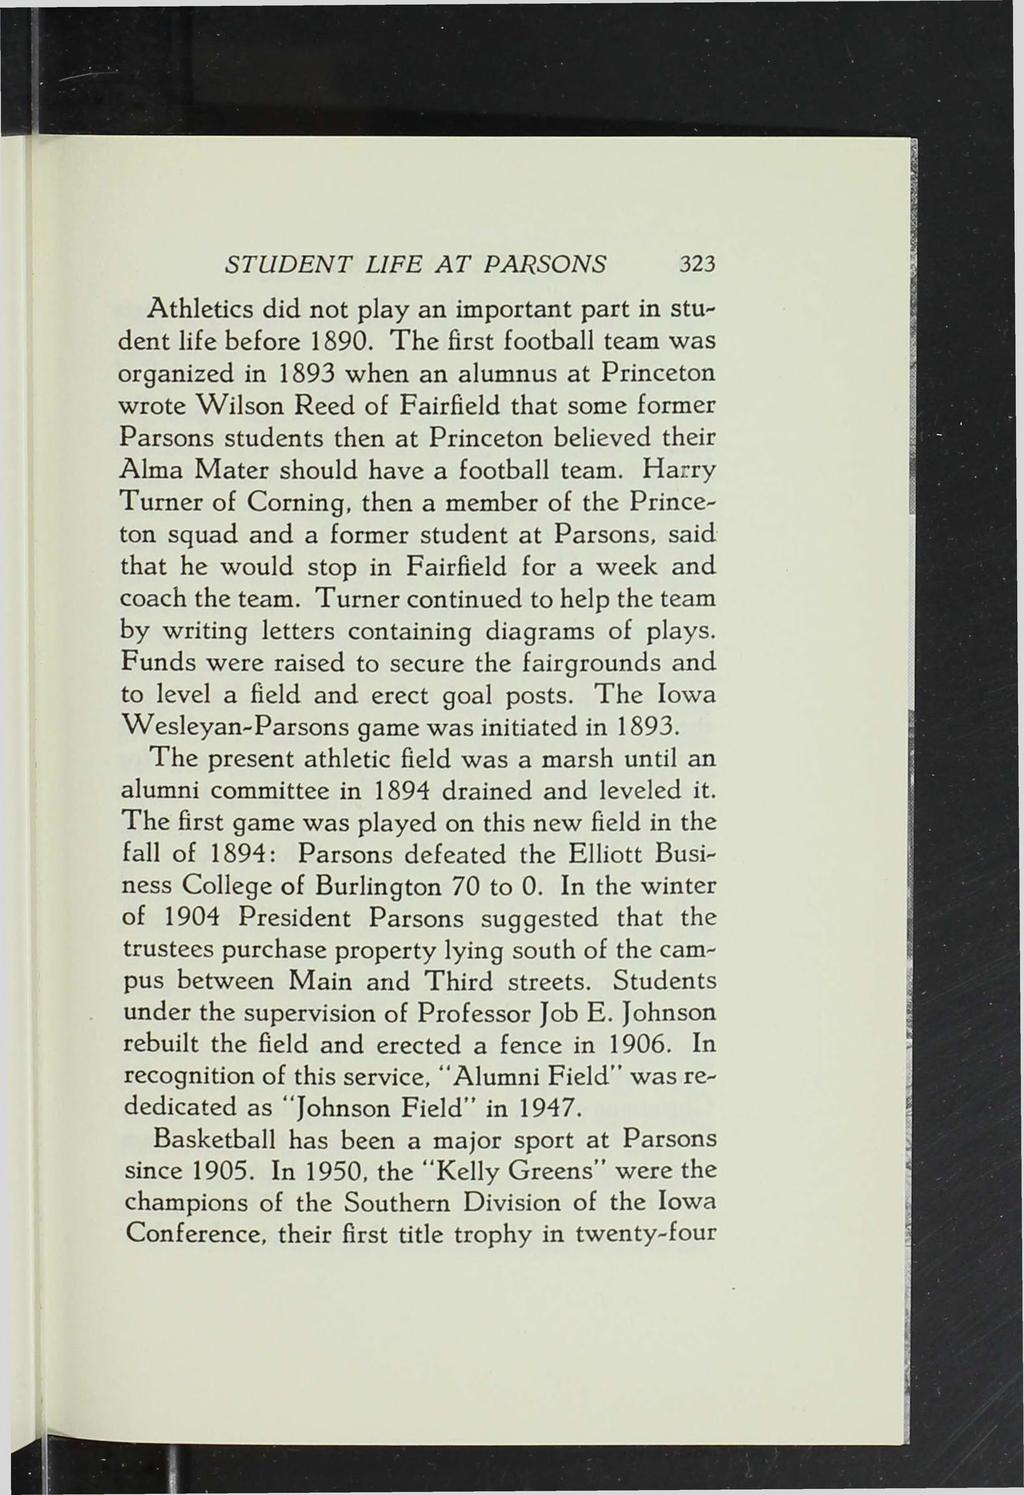 STUDENT LIFE AT PARSONS 323 Athletics did not play an important part in student life before 1890.